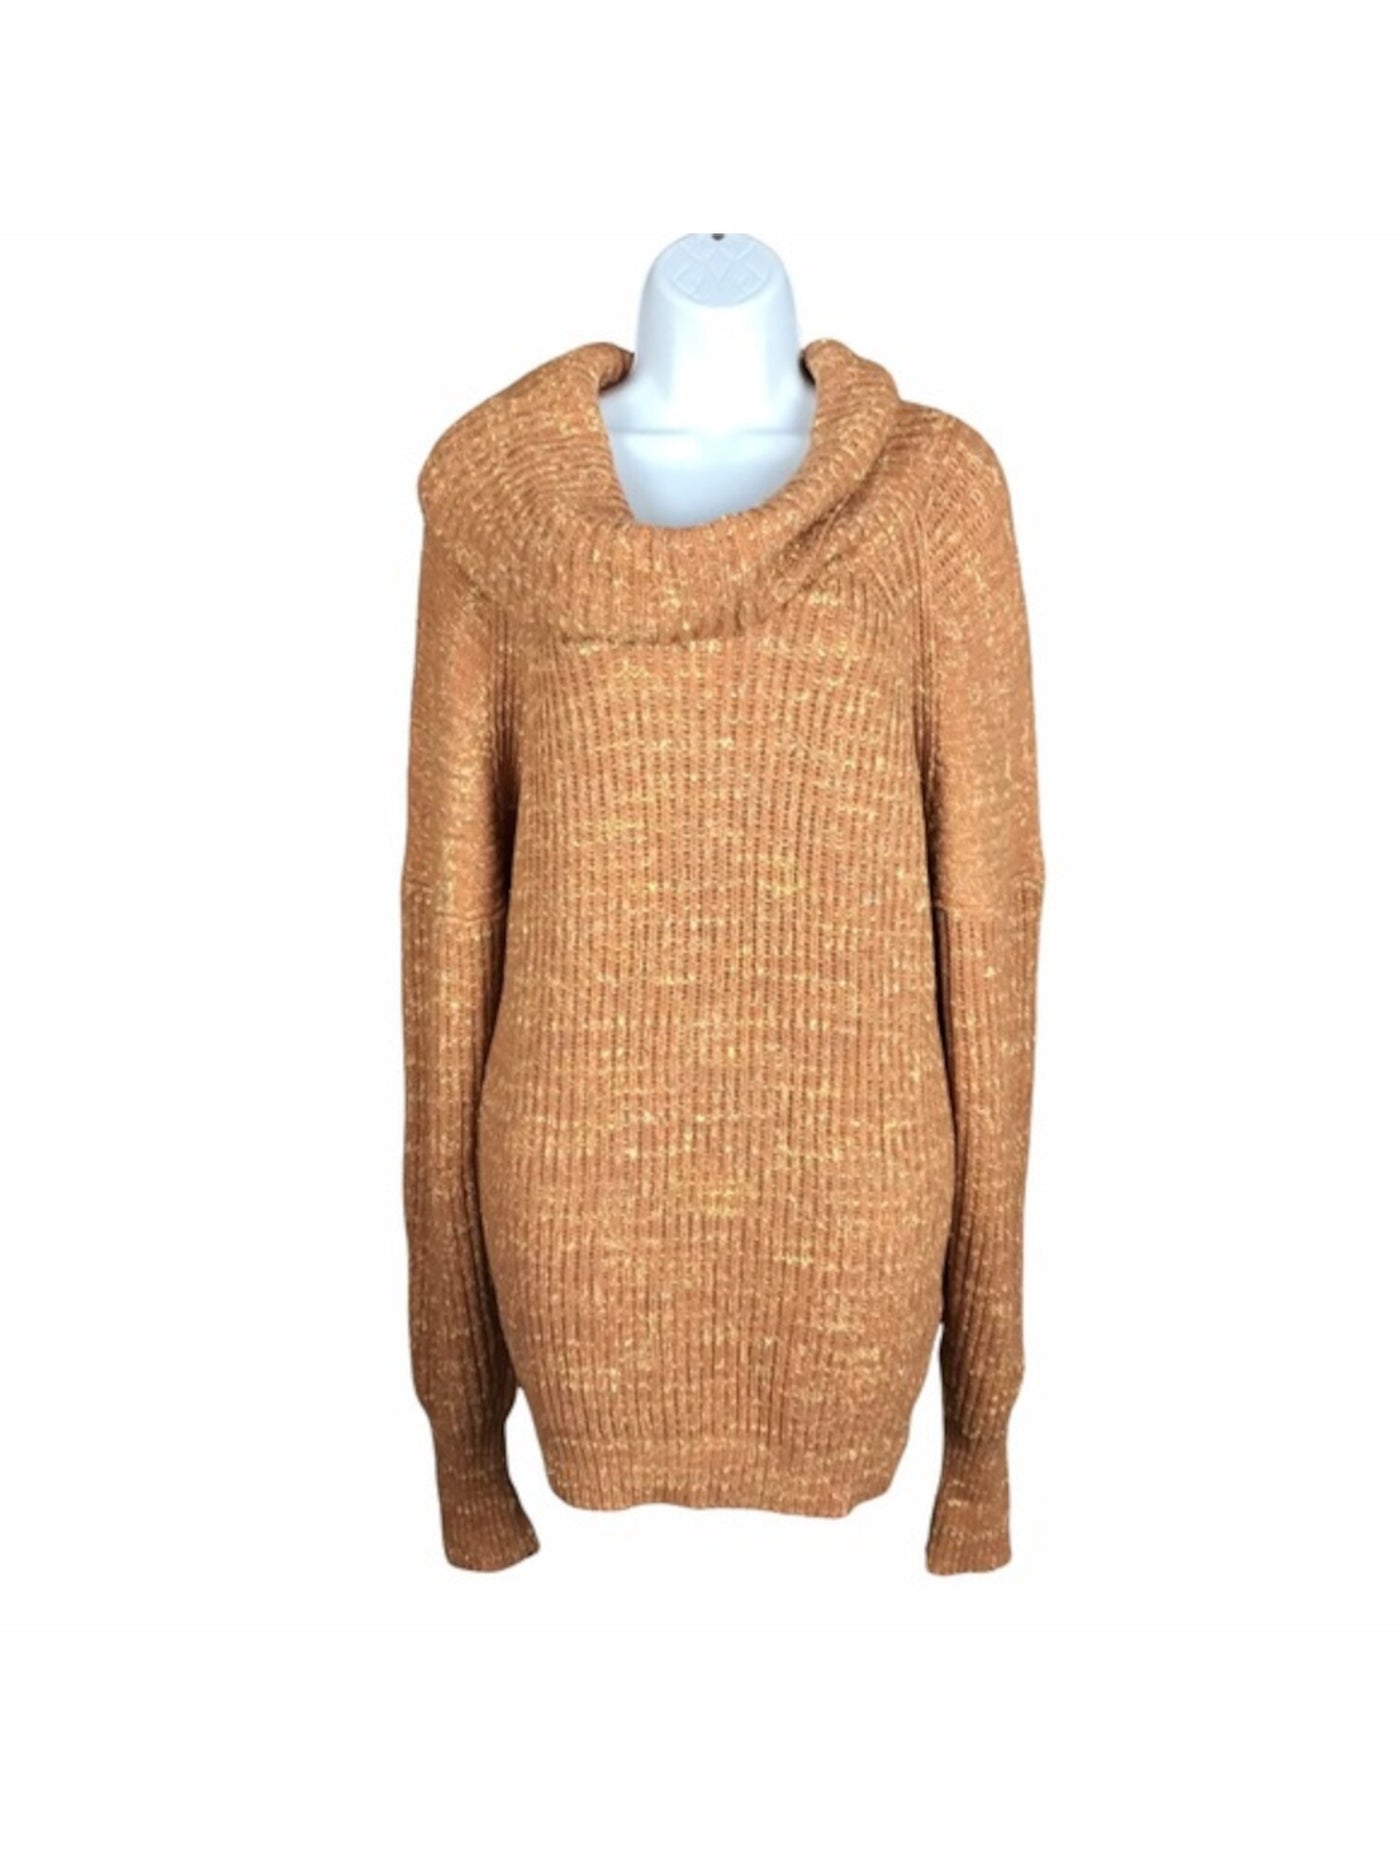 FREE PEOPLE Womens Cowl Neck Sweater